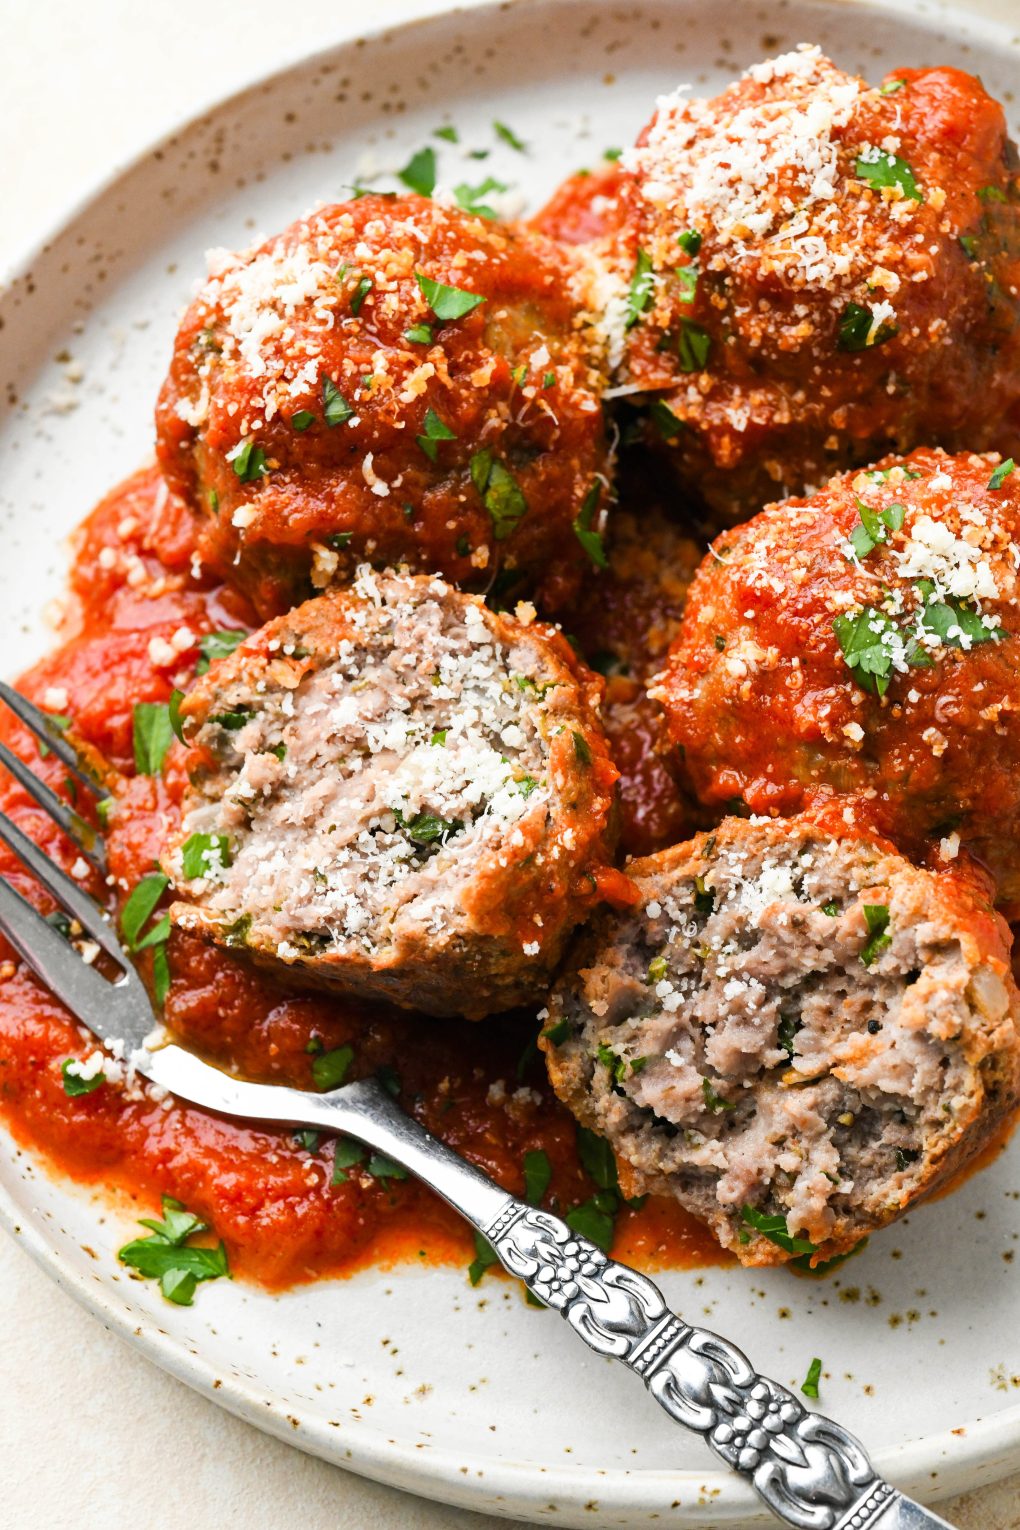 Four gluten free meatballs on a small ceramic plate, one cut open to expose the interior. Topped with grated parmesan and chopped parsley. 